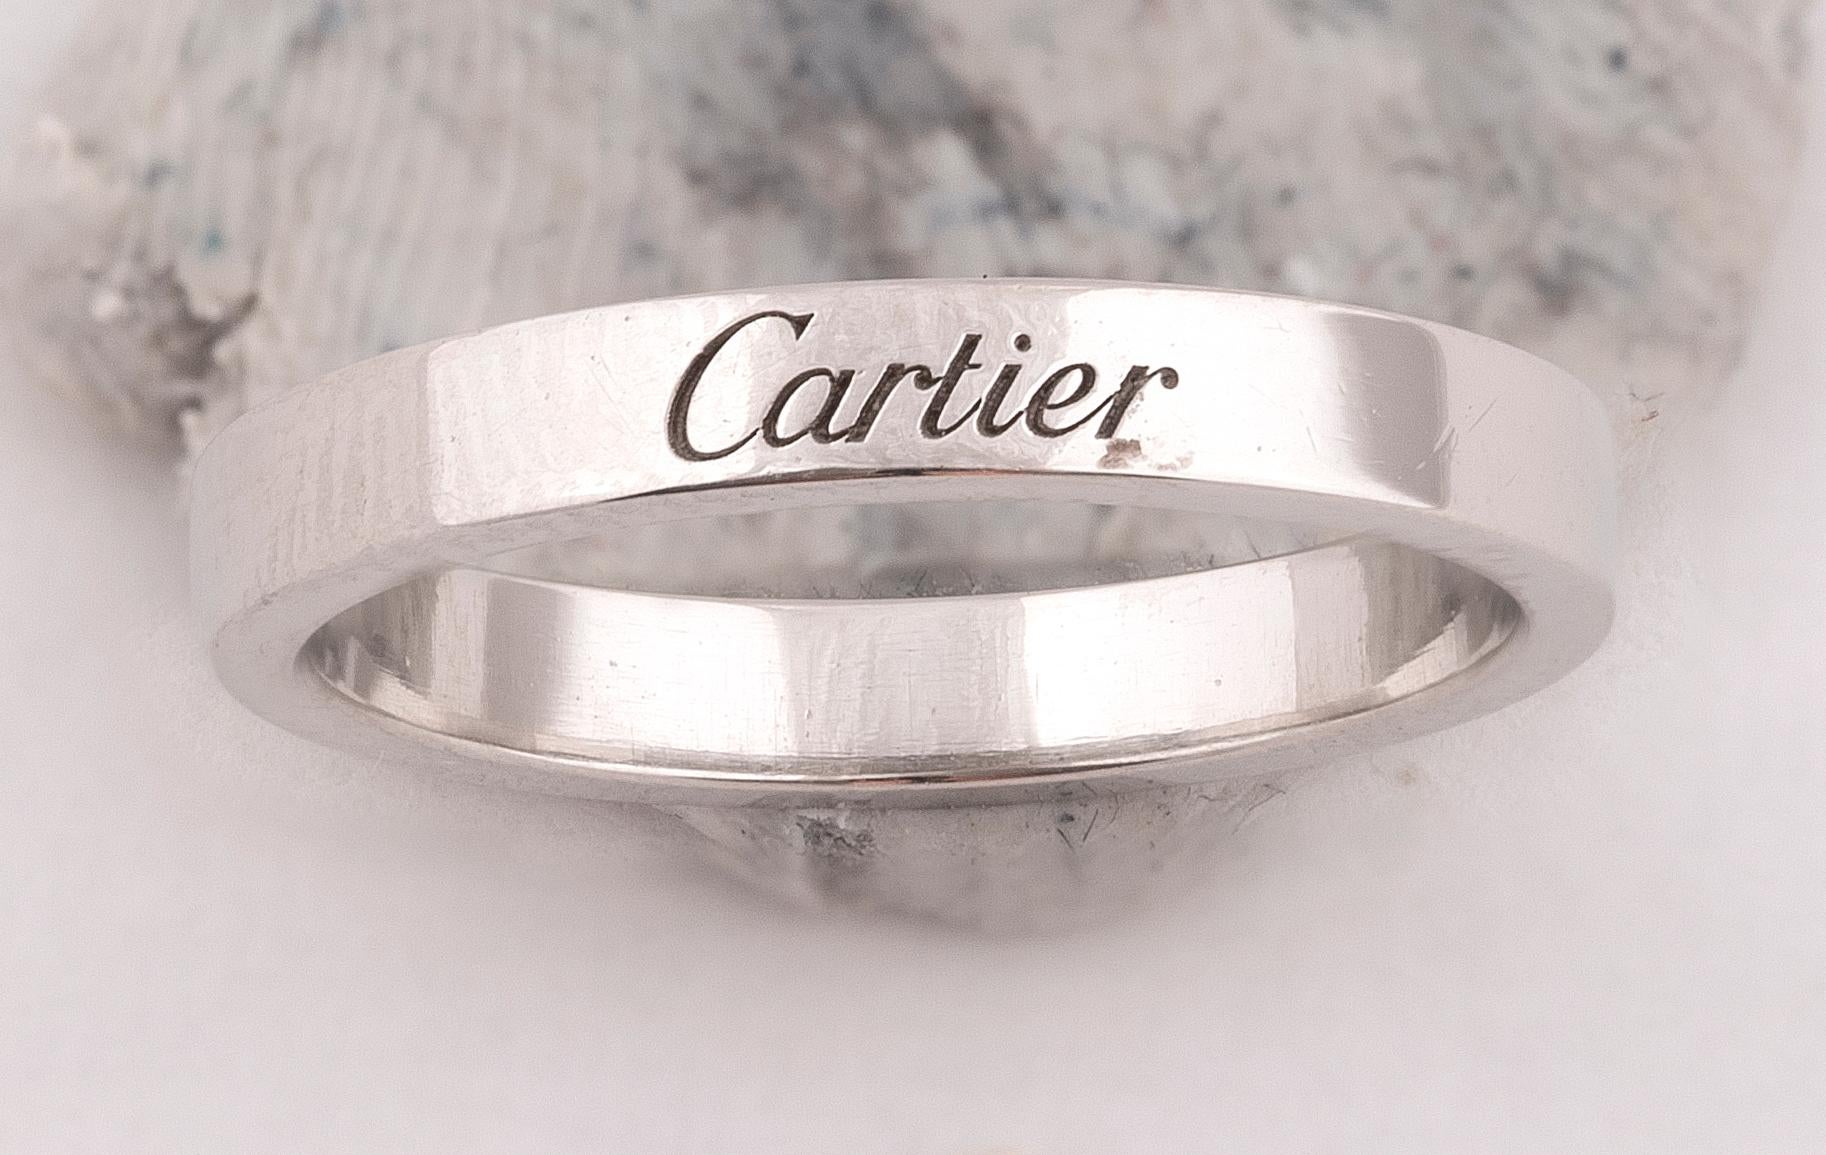 
Signed Cartier, IW 7749. Stamped 950. Ring size 7. Cartier size 55. 5.4gms.